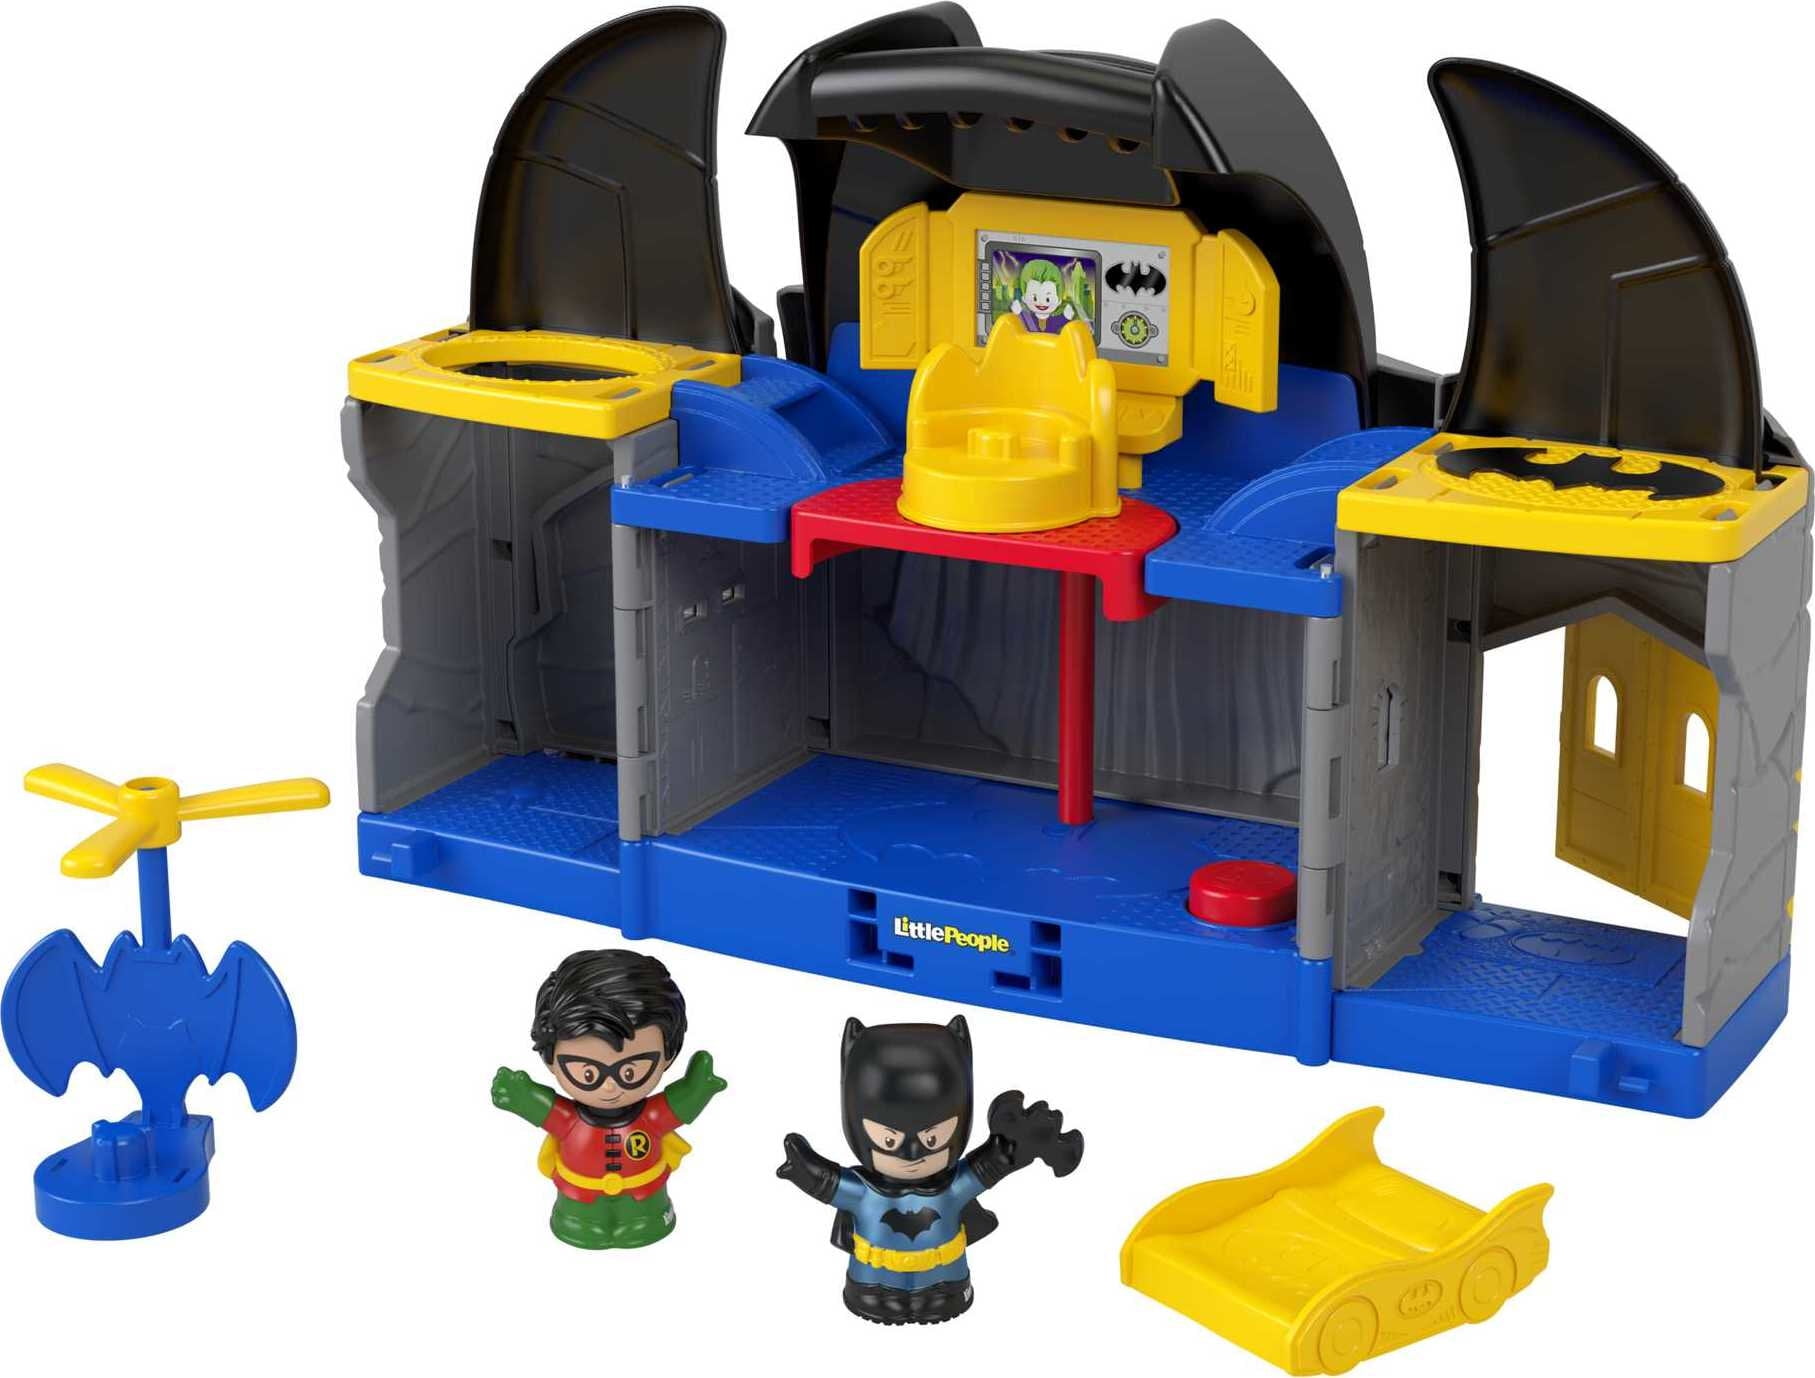 Gift for Kids 4 to 8 Years Old & Fans of Batman Storage Hot Wheels DC Batcave Playset with Batman Character Car Exclusive Replica of the Batcave from The Batman Movie 